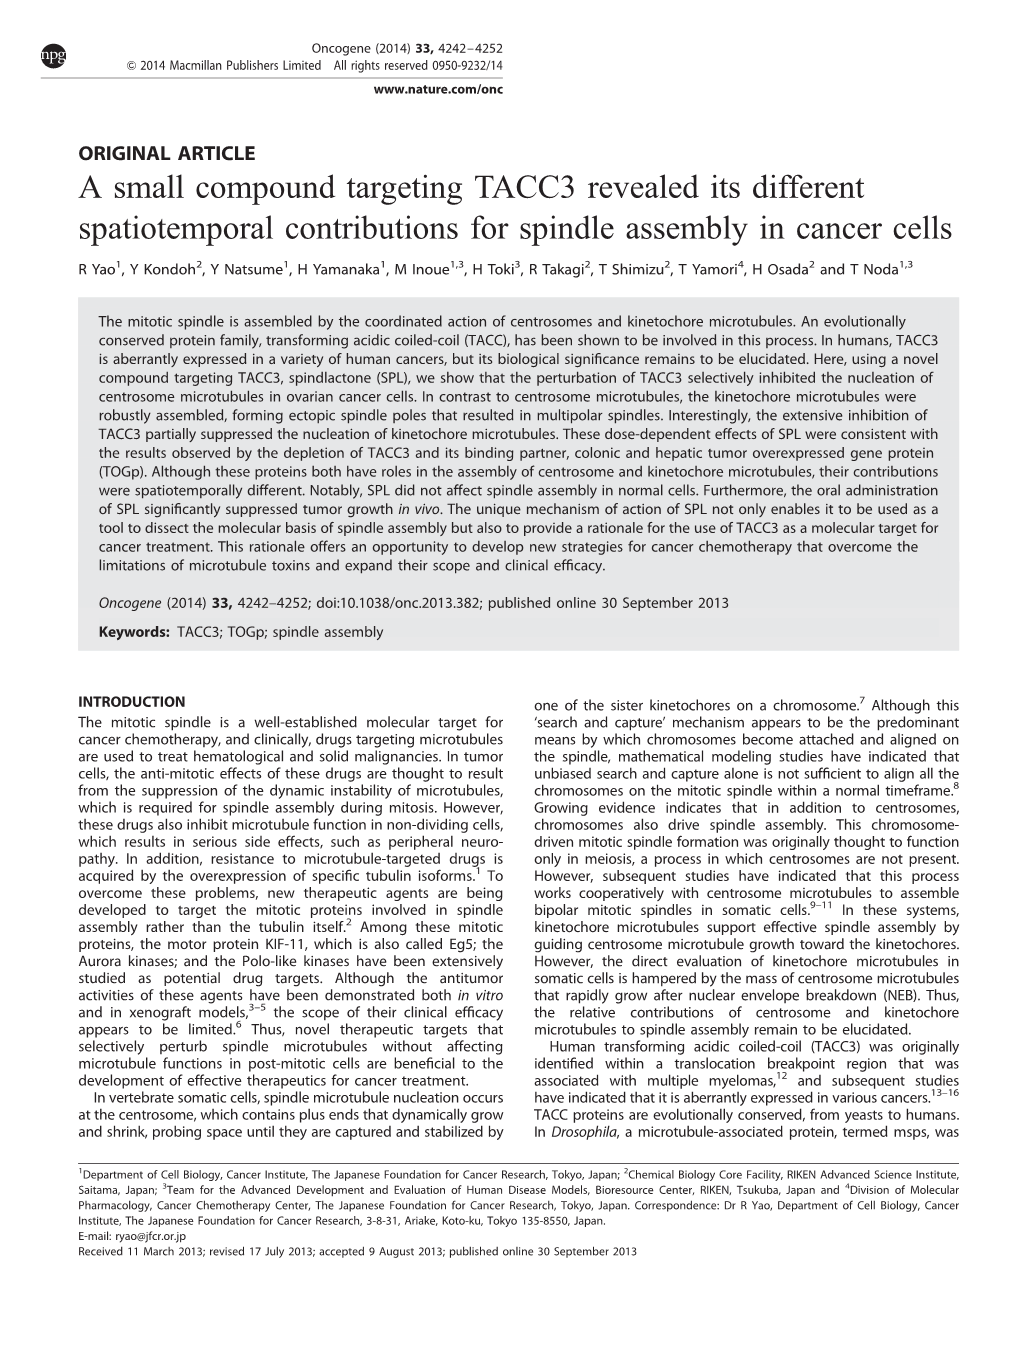 A Small Compound Targeting TACC3 Revealed Its Different Spatiotemporal Contributions for Spindle Assembly in Cancer Cells